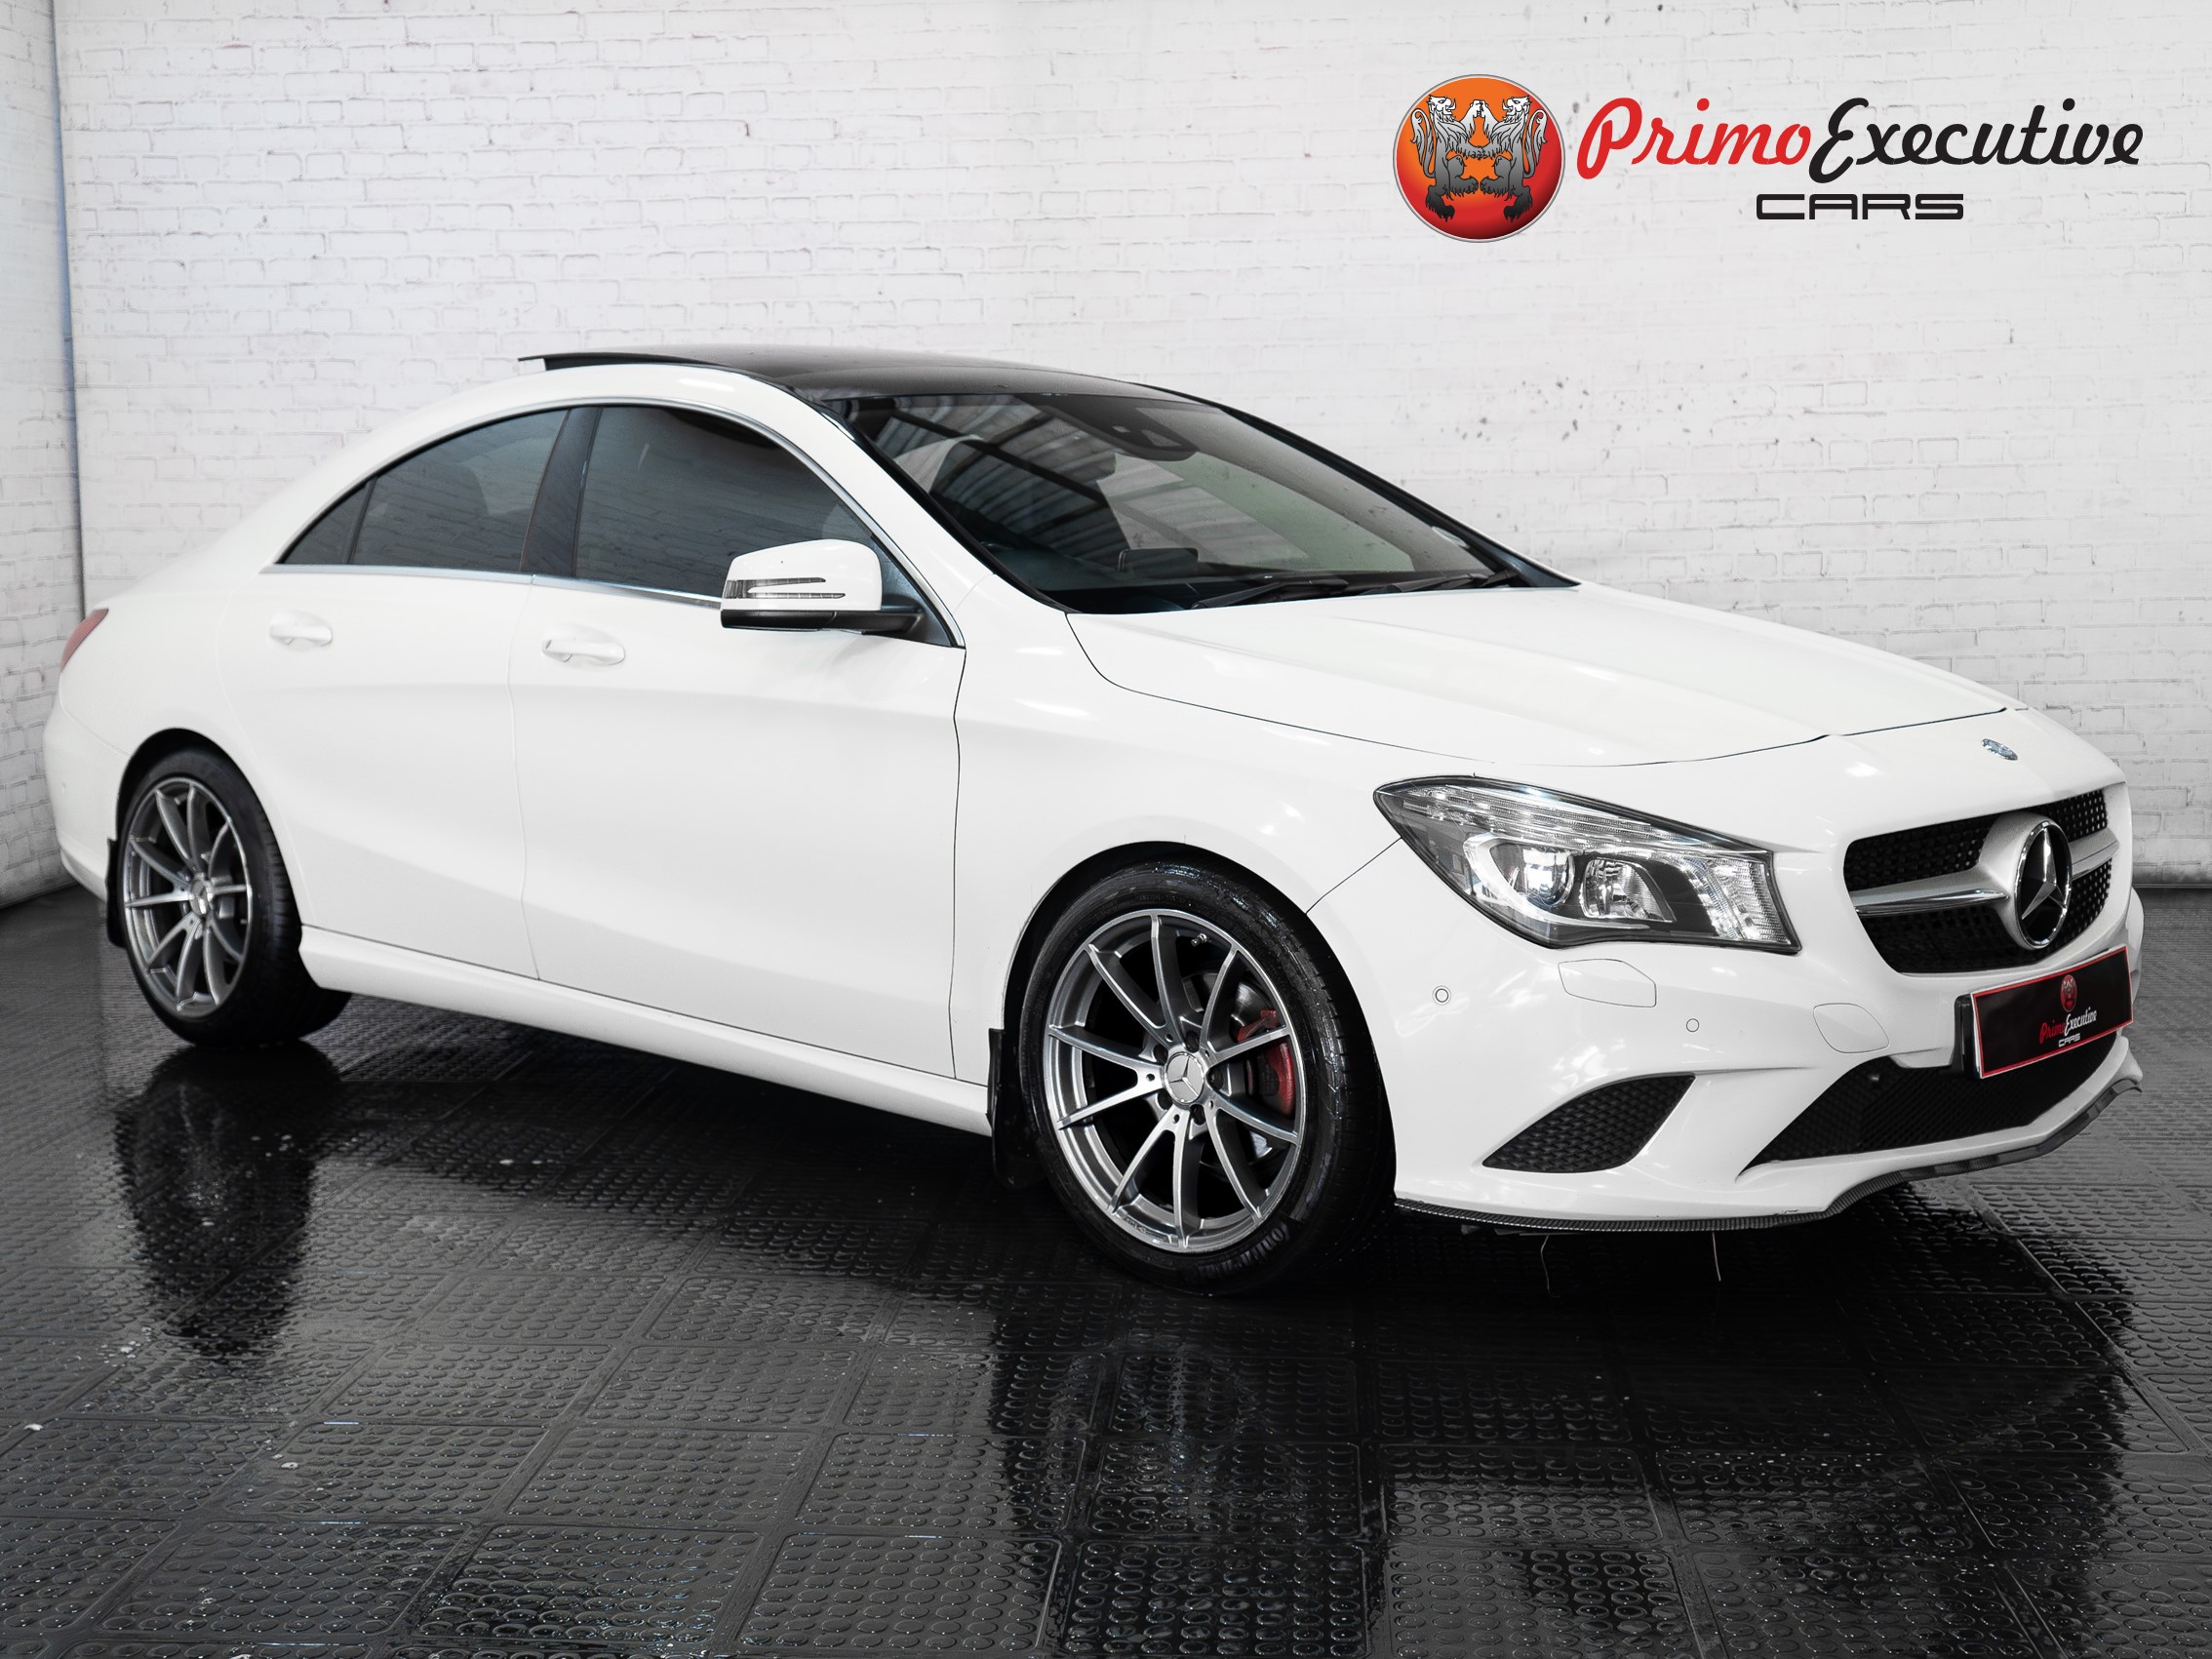 2015 Mercedes-Benz CLA  for sale - 510597